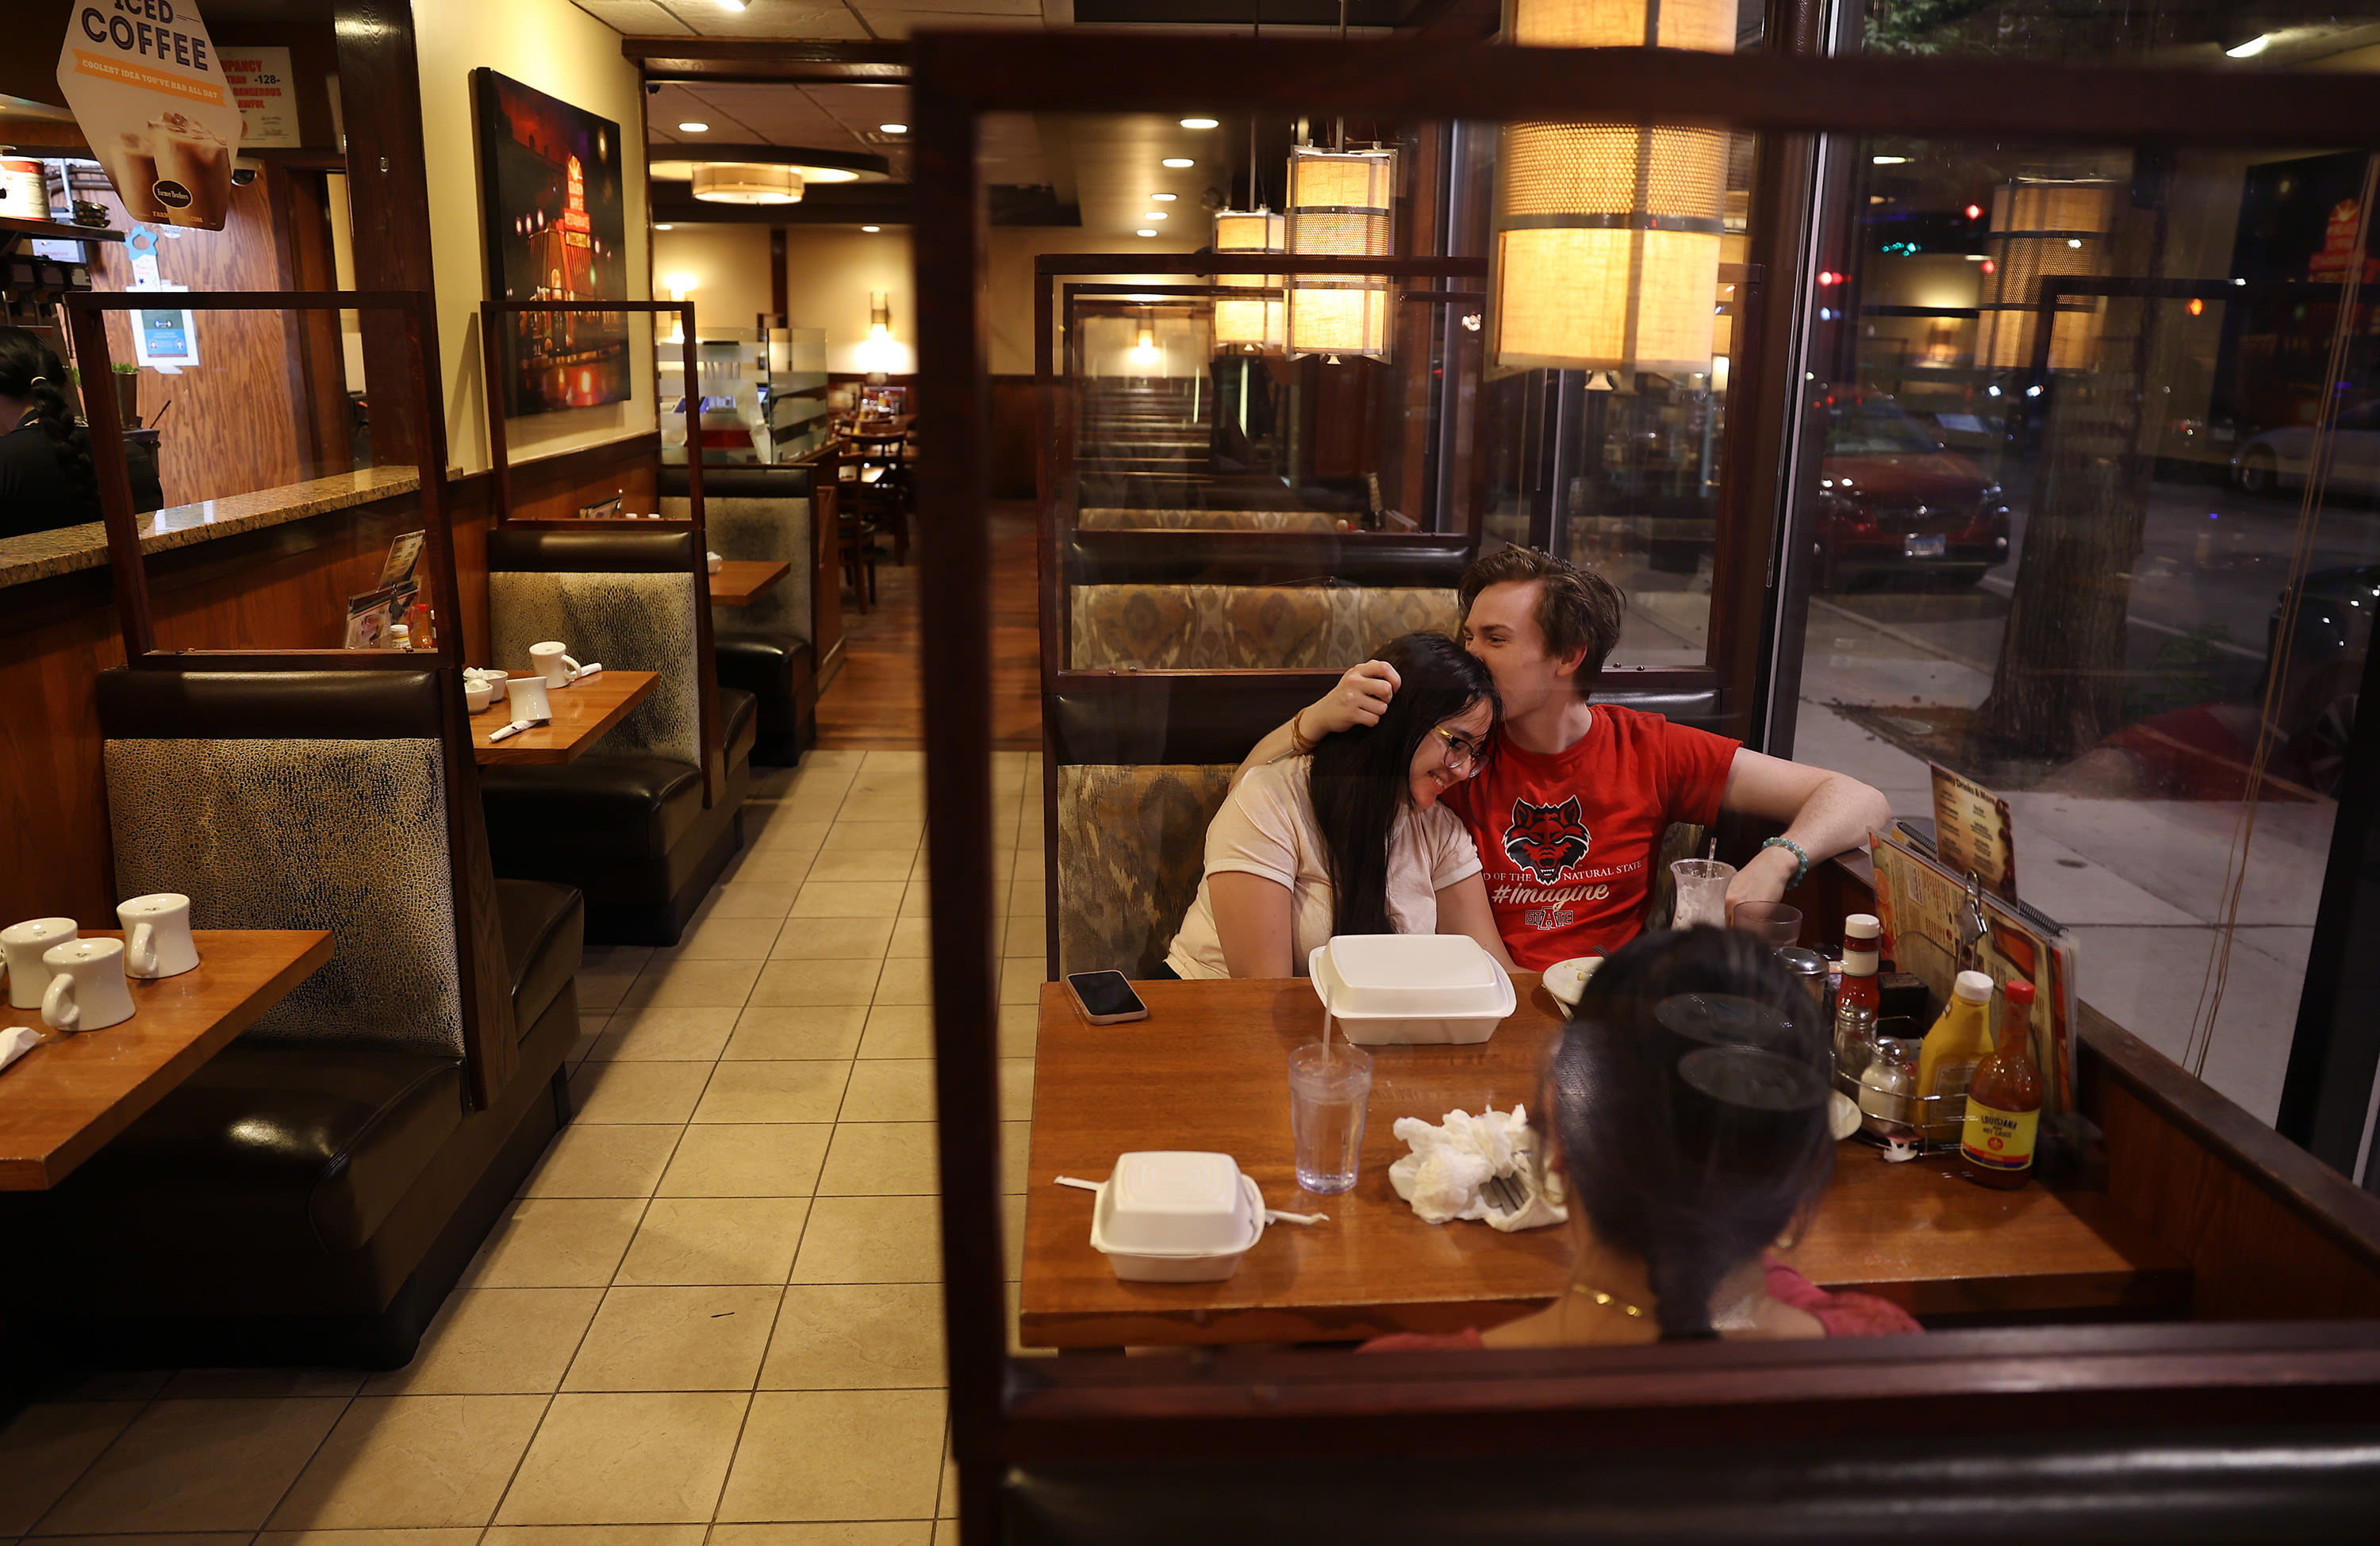 12 hours overnight at one of Chicago’s last 24/7 diners